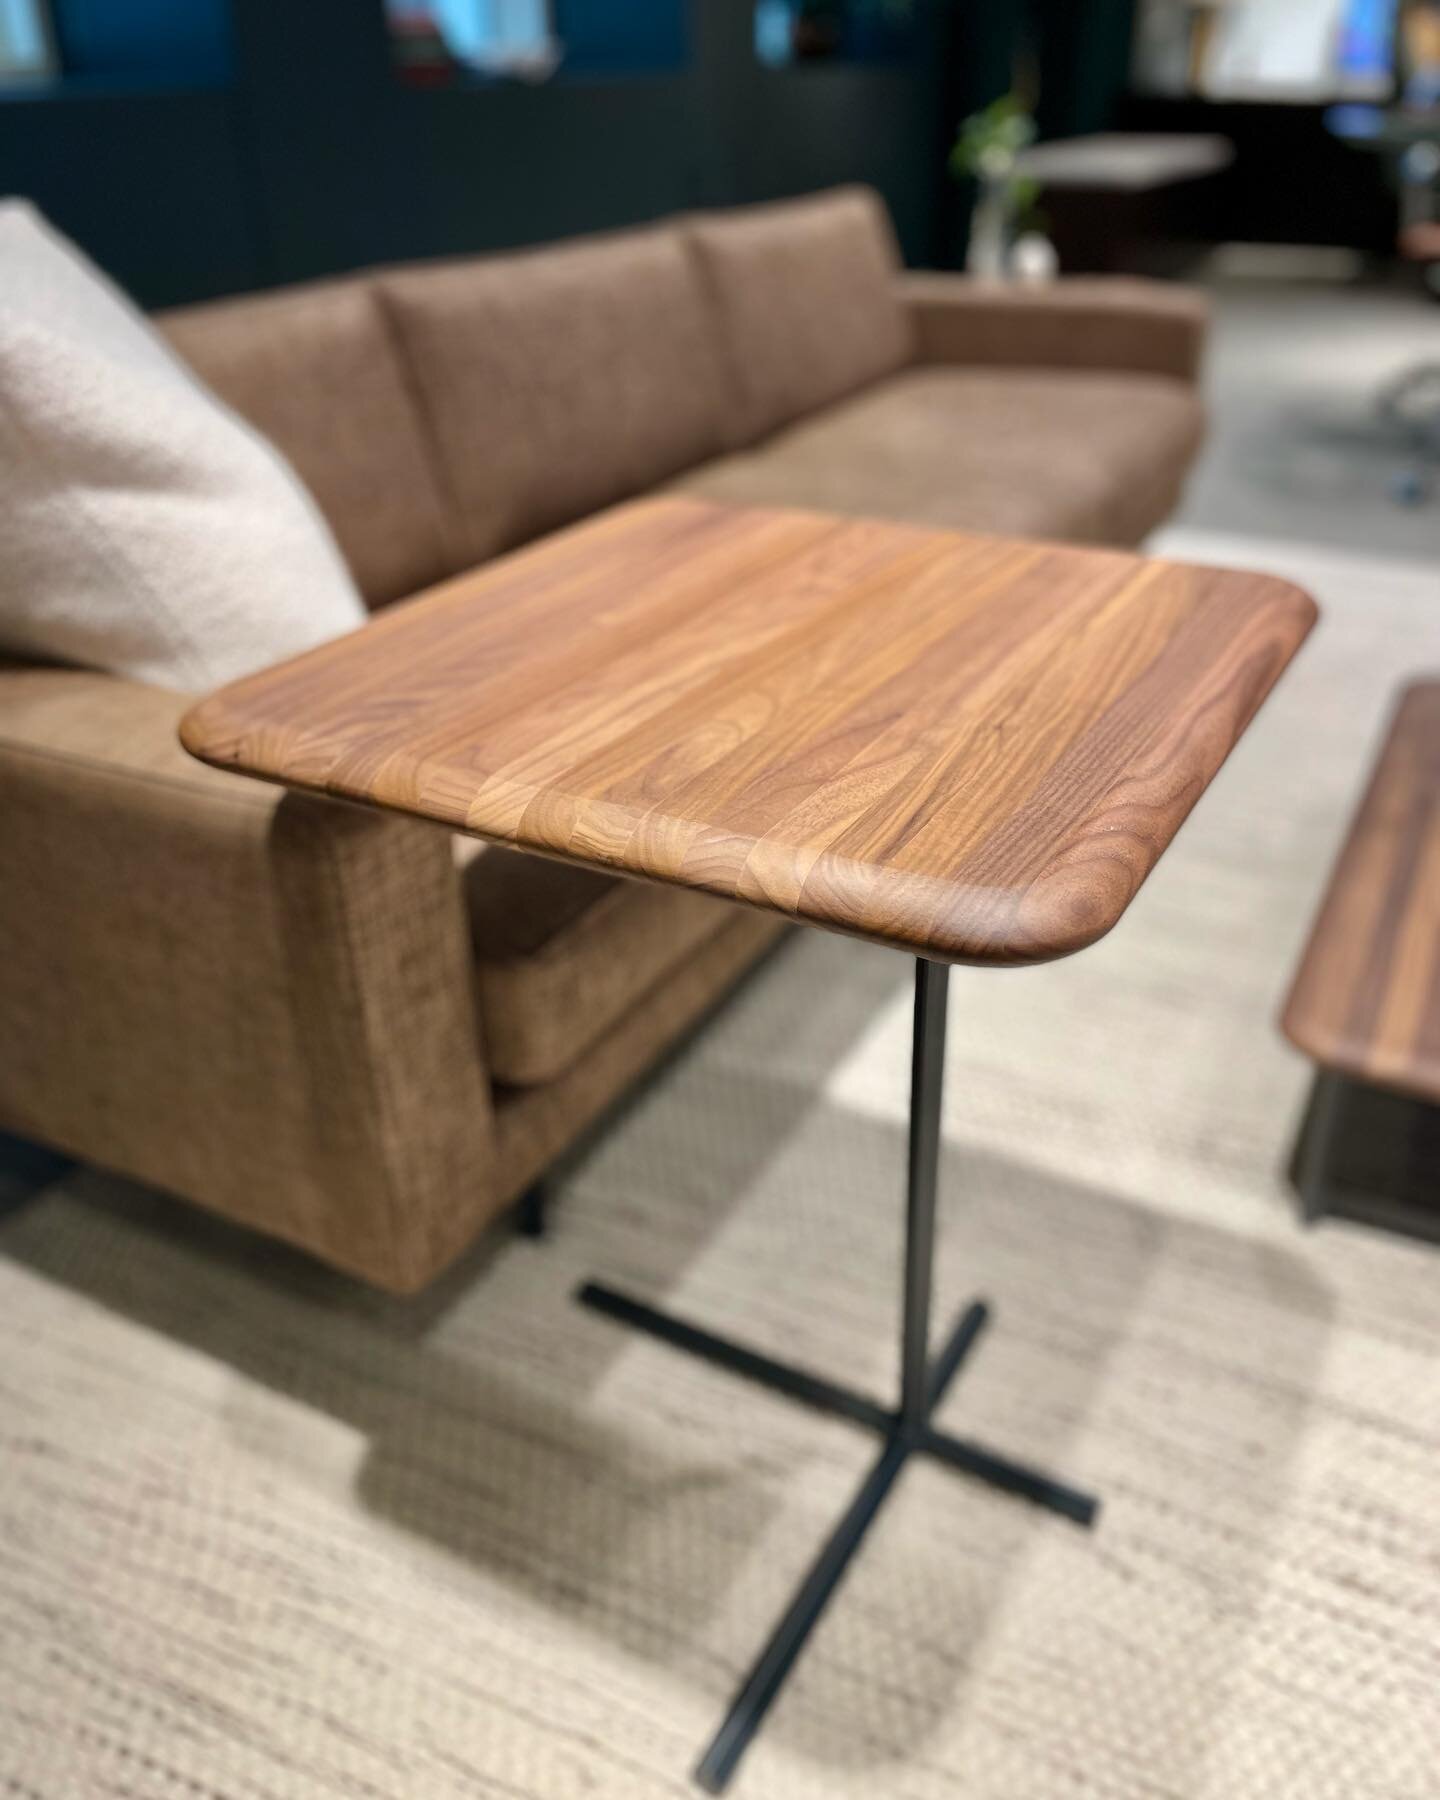 Reflecting back on NeoCon last week and the thrill of seeing Rowen pull up tables from @ofs so beautifully rendered in these solid wood butcher block tops.

#NeoCon2022 #NeoCon #ofs #imagineaplace #youplusofs #newproducts #productdesign #officedesign